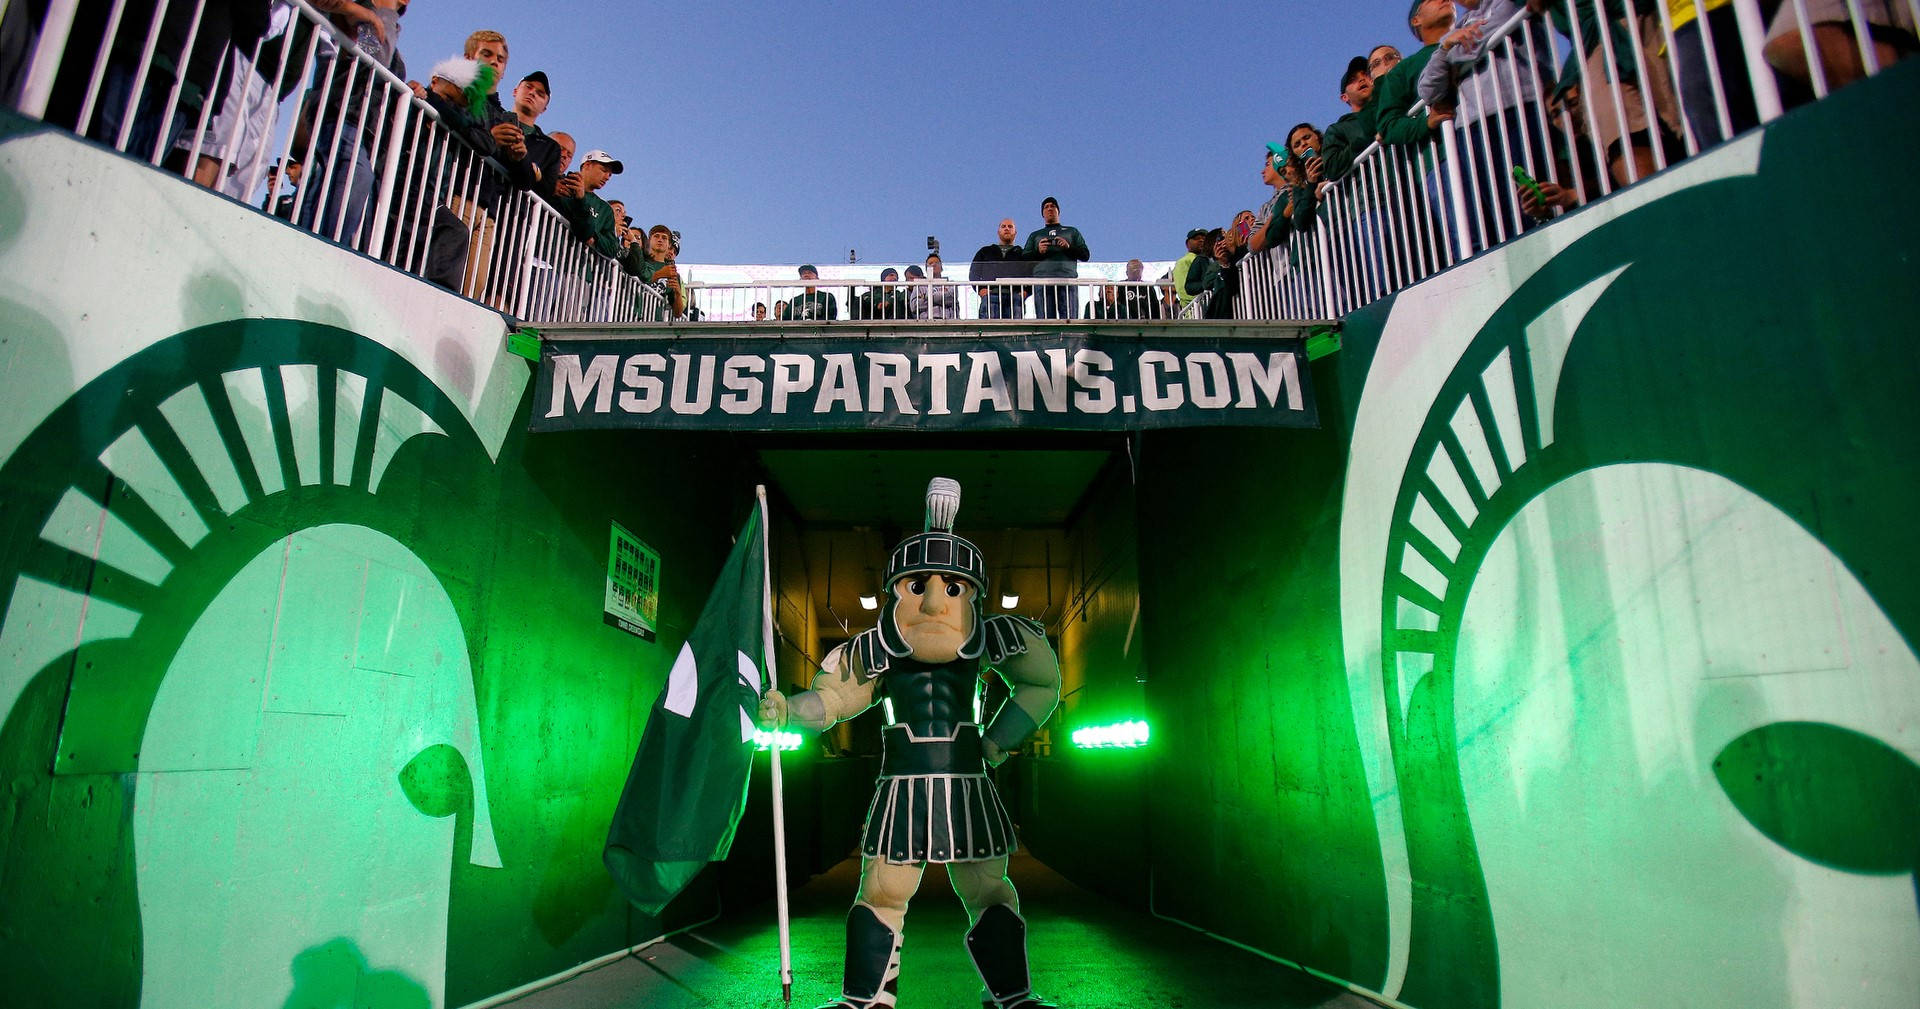 Michigan State University's Spartan Mascot in Action Wallpaper